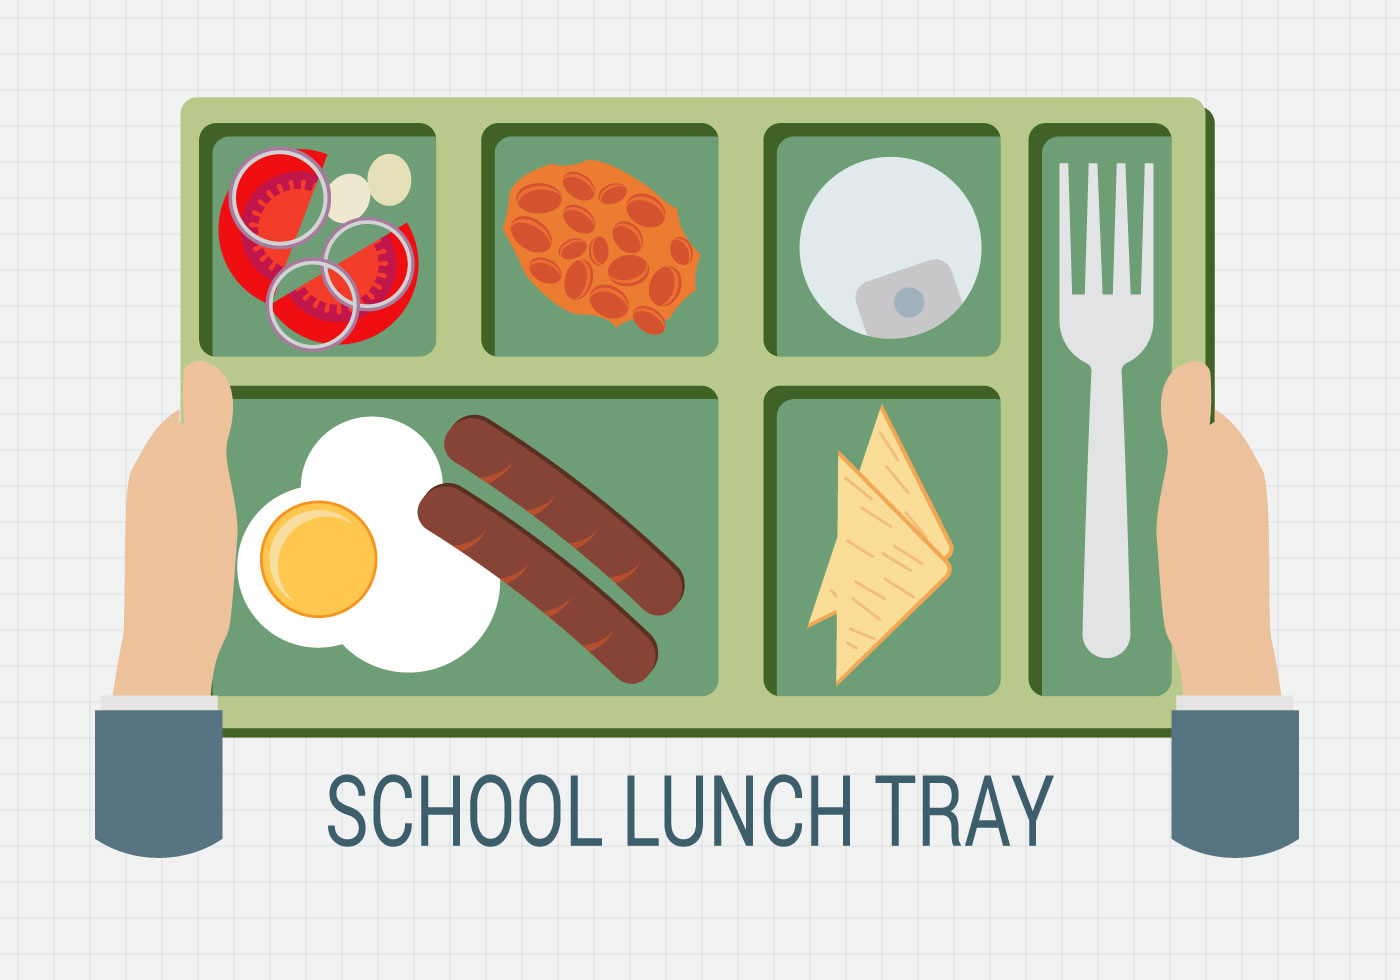 Free Hand Holding A School Lunch Tray Vector - Download ...